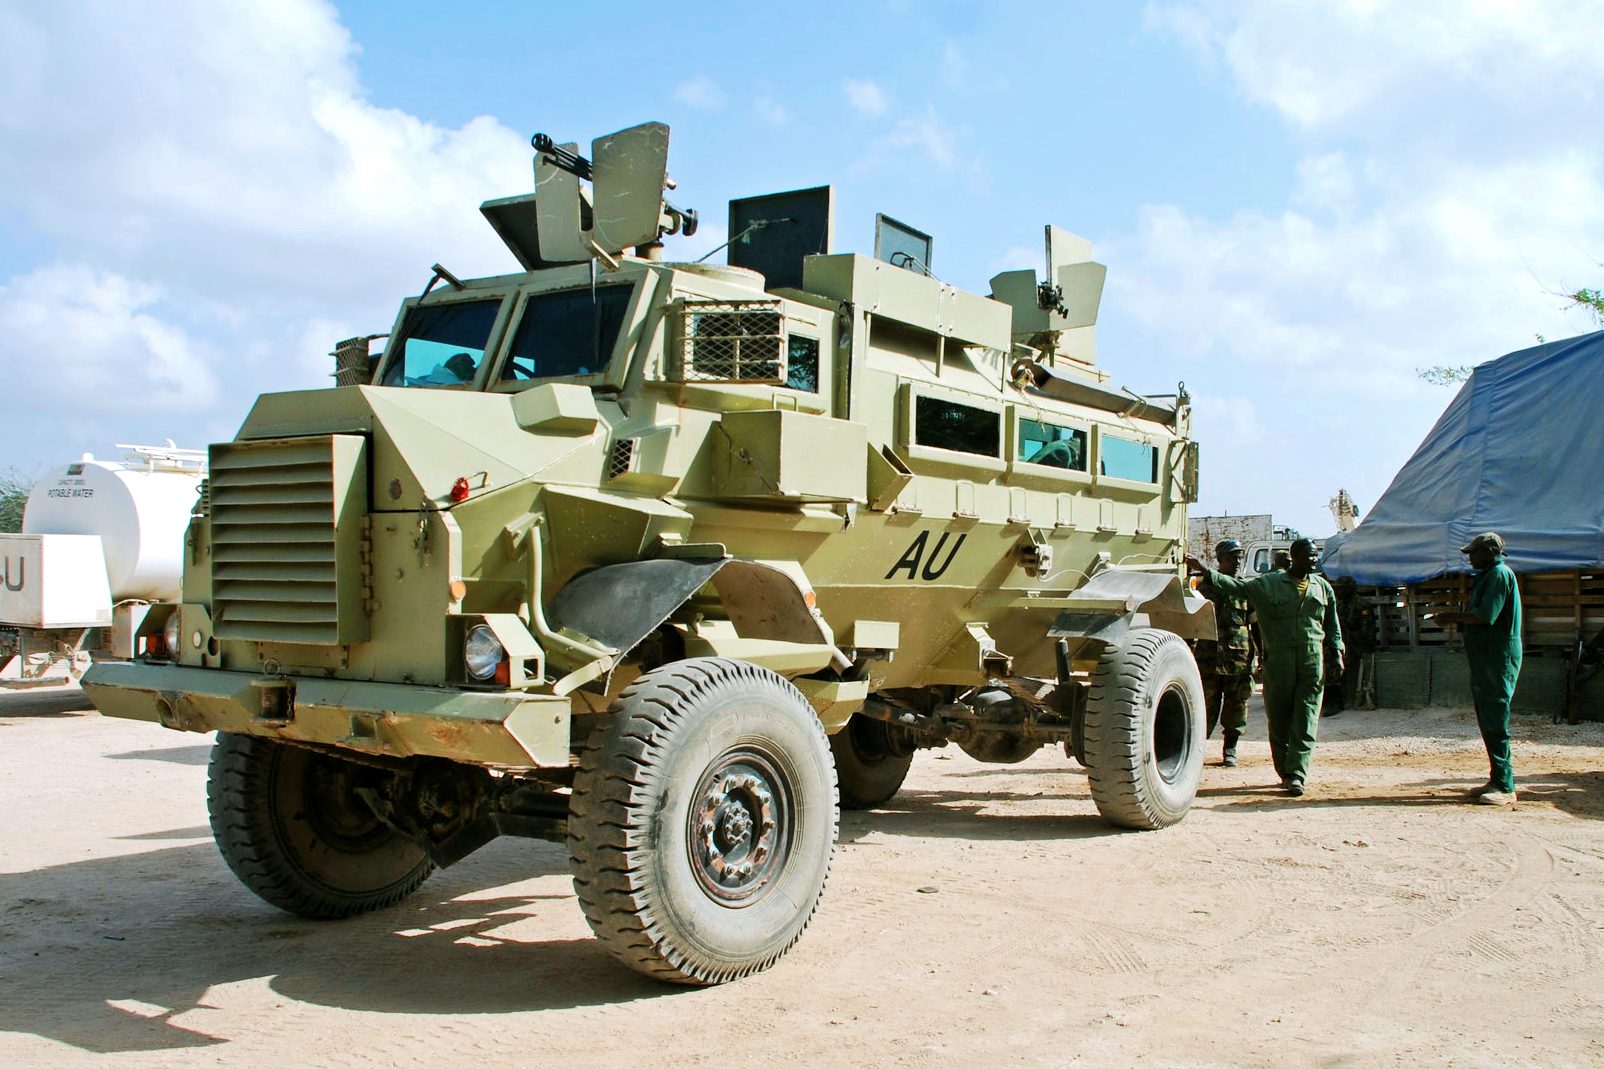 AU armored personnel carrier